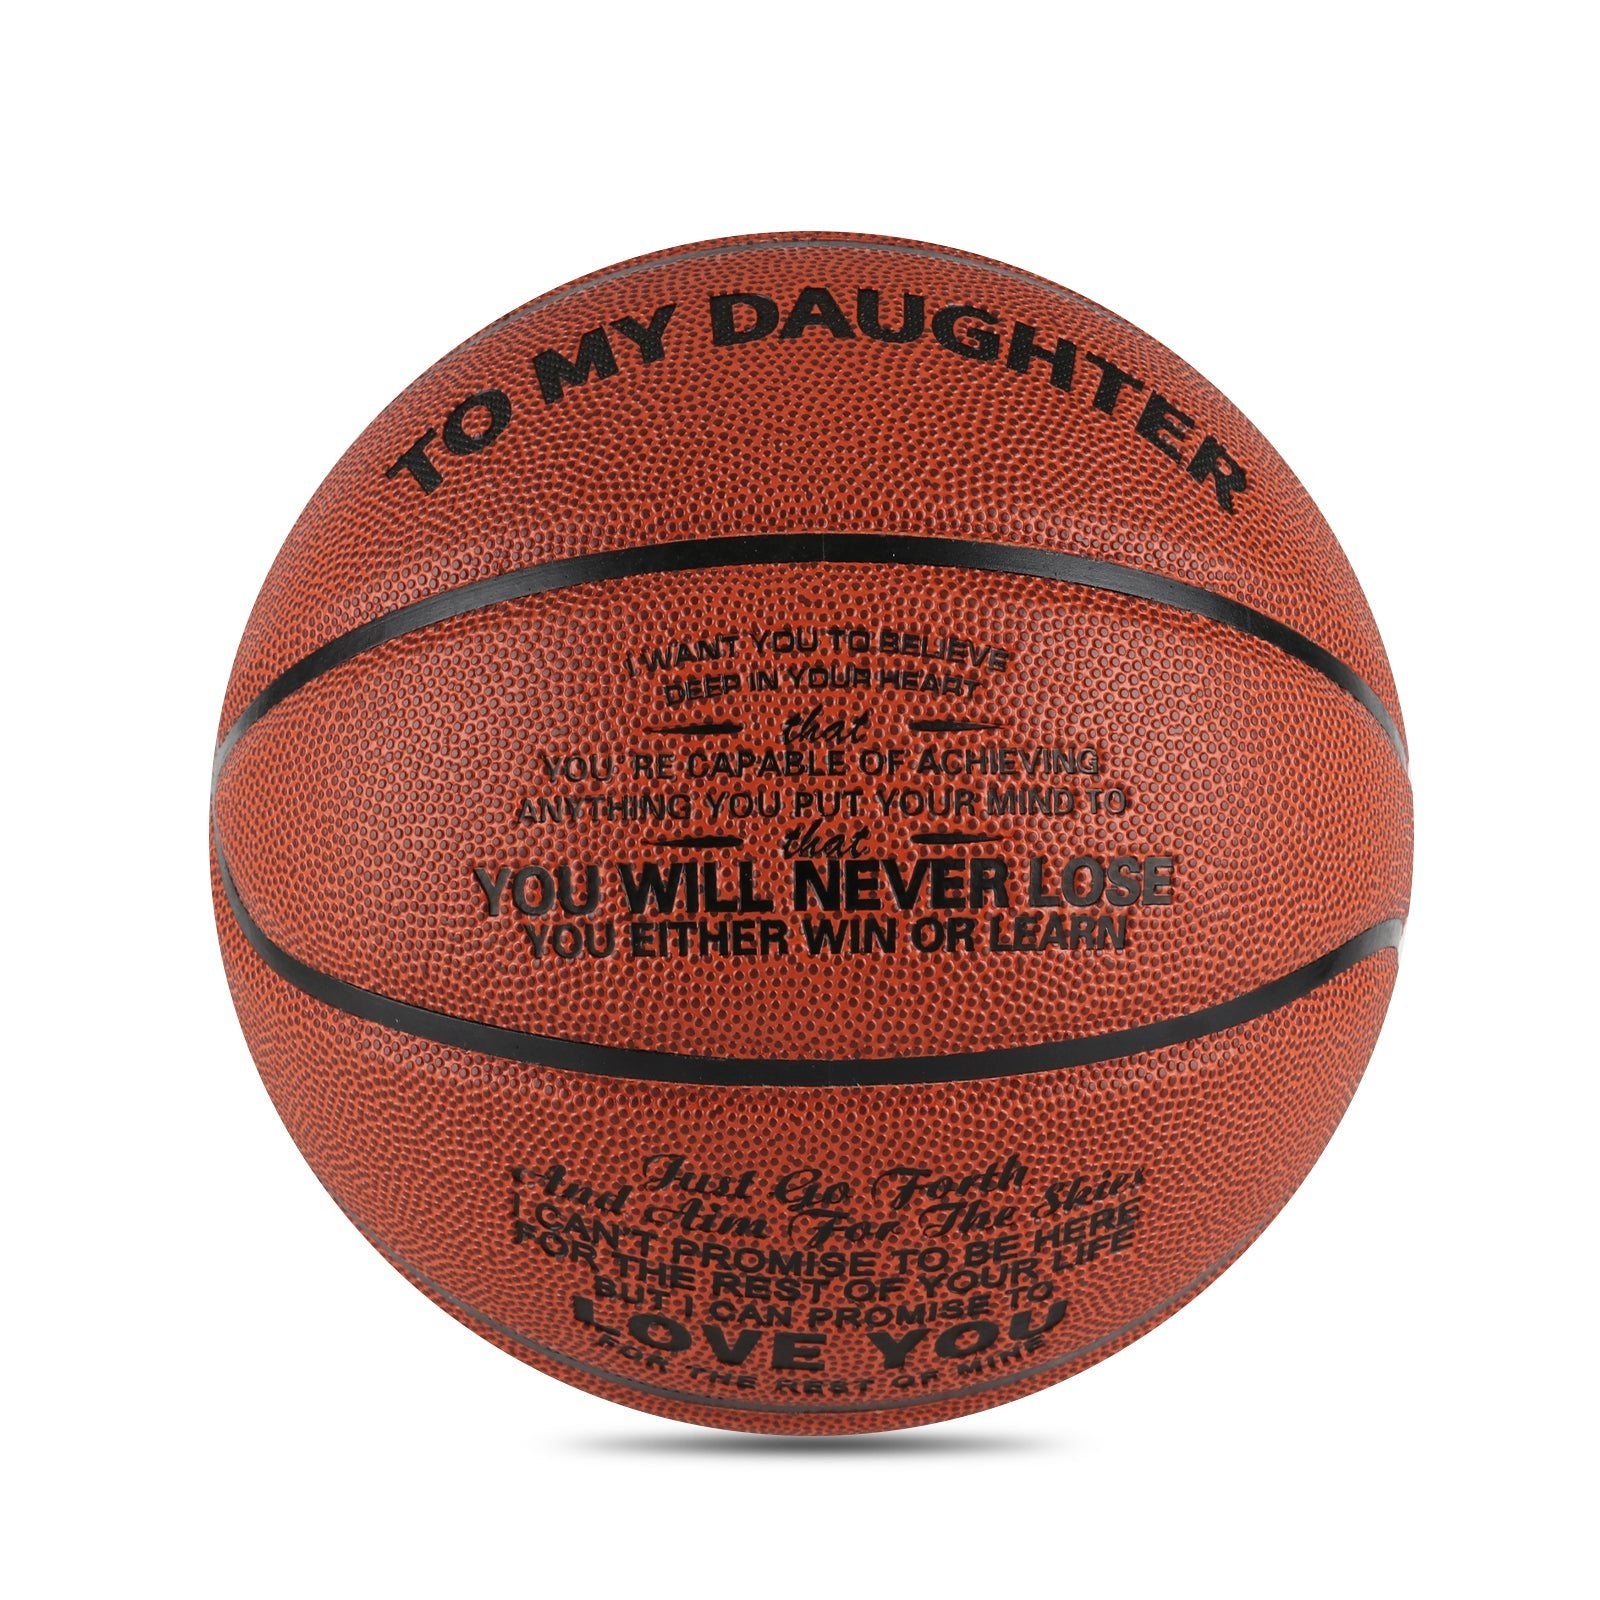 Personalized Letter Basketball For Daughter From Mom, Basketball Indoor/Outdoor Game Ball For Girl, Birthday Christmas Gift For Daughter From Mom - Family Watchs